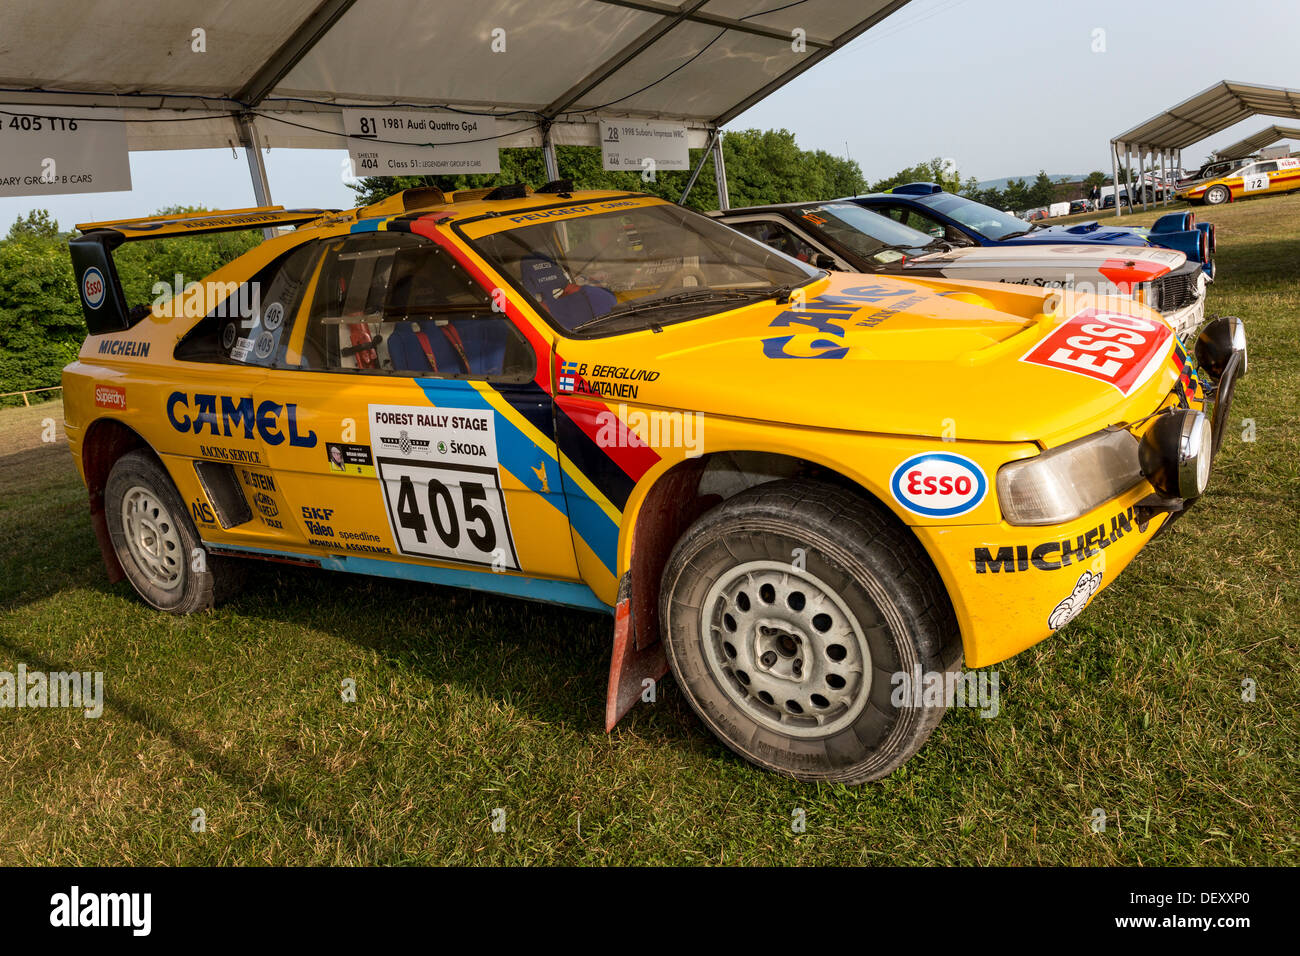 1985 Peugeot 405 T16 Dakar rally car in the paddock at Goodwood Festival of  Speed, Sussex, UK Stock Photo - Alamy